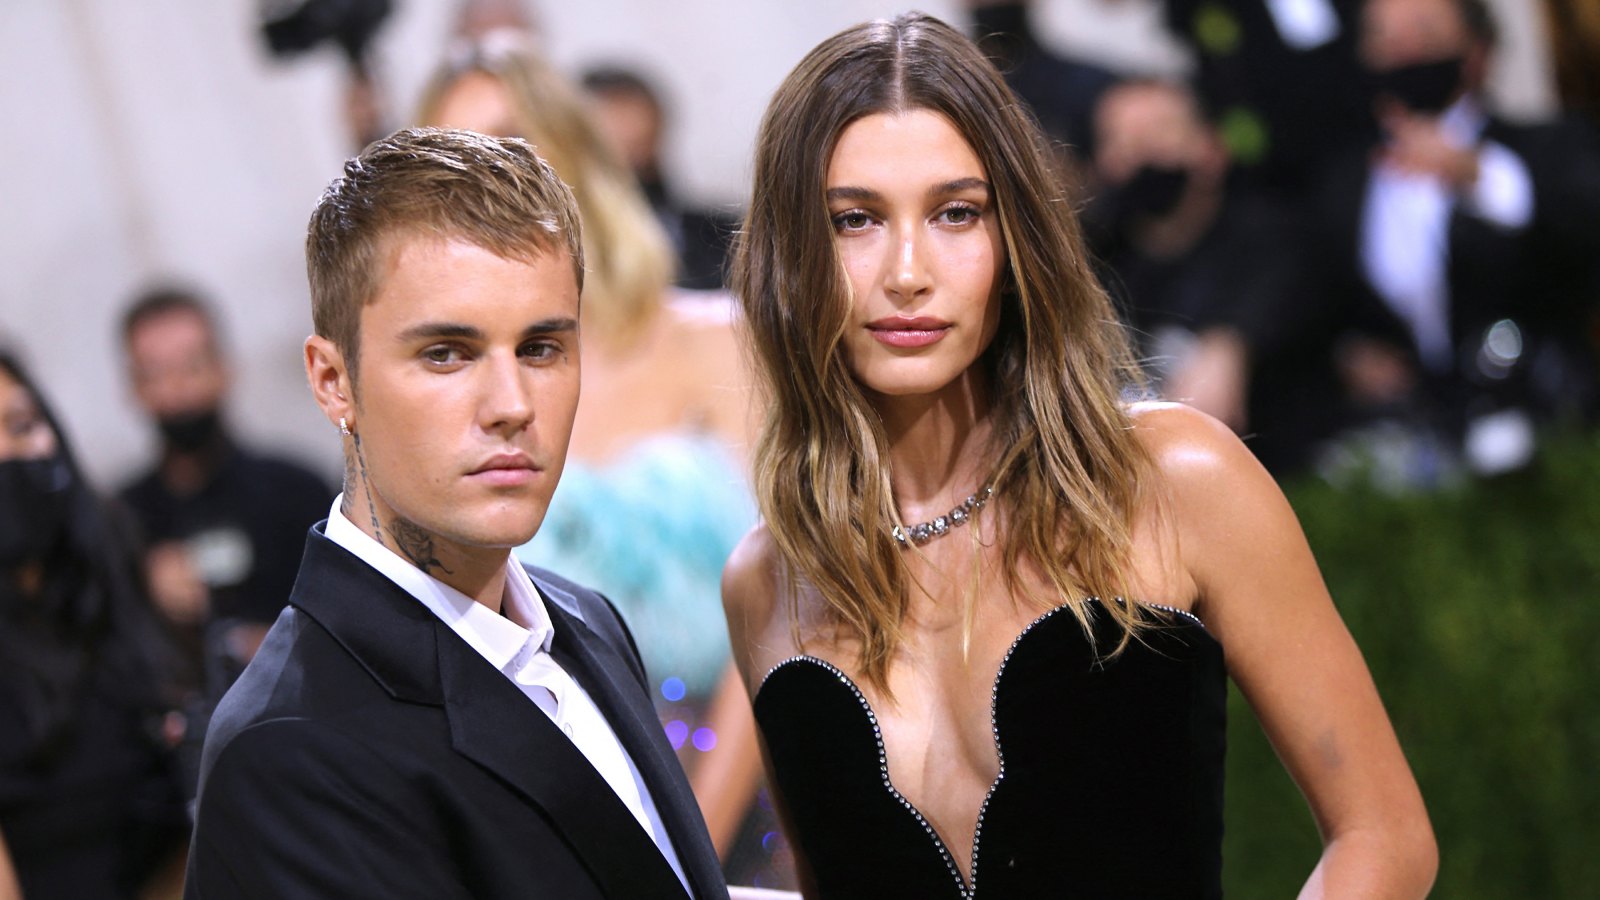 Hailey Bieber Slams Claims That Husband Justin ‘Mistreats’ Her: ‘It’s So Far From the Truth’